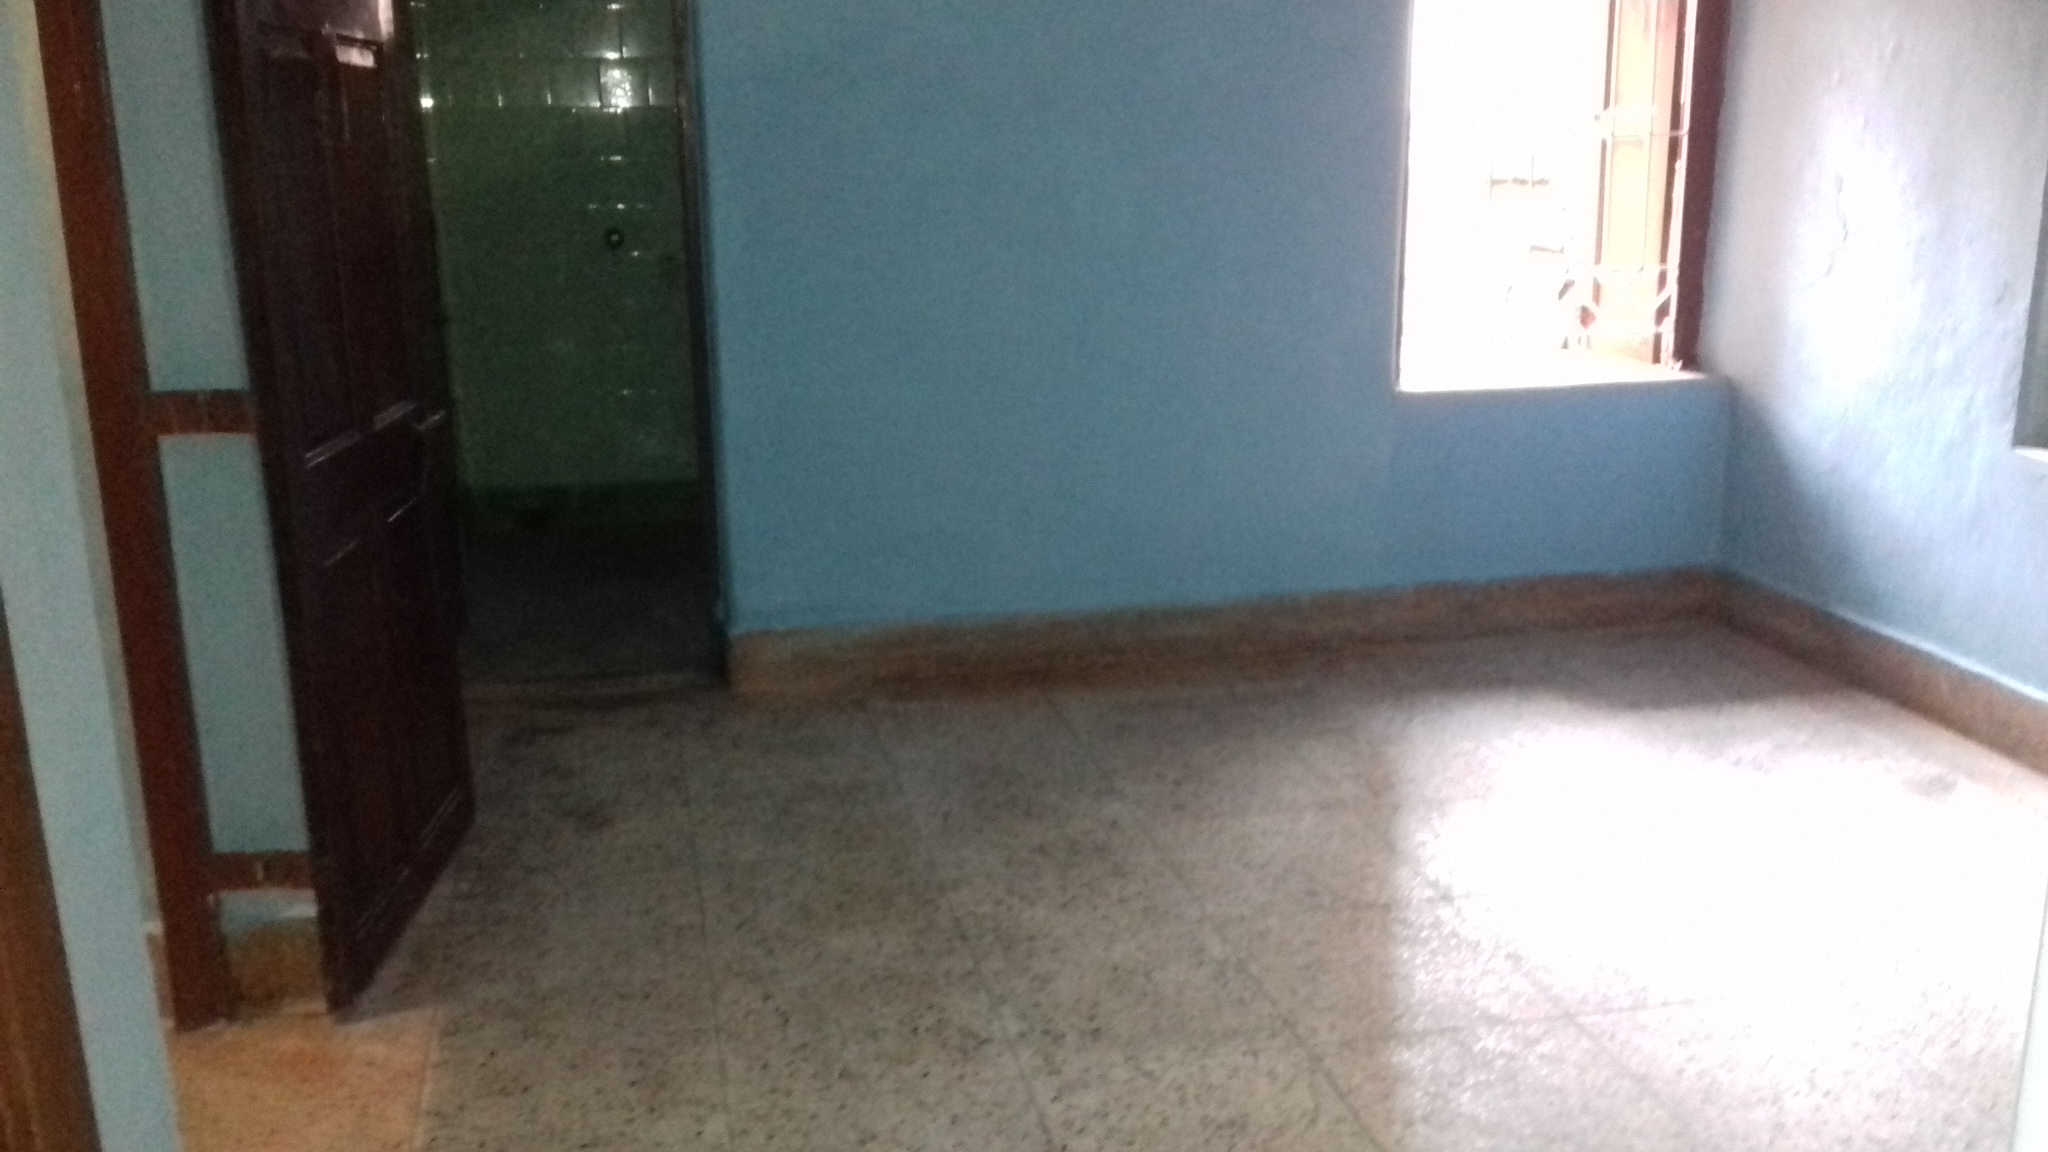 Office For Rent in Nagerbazar Kolkata (Id: 18884)